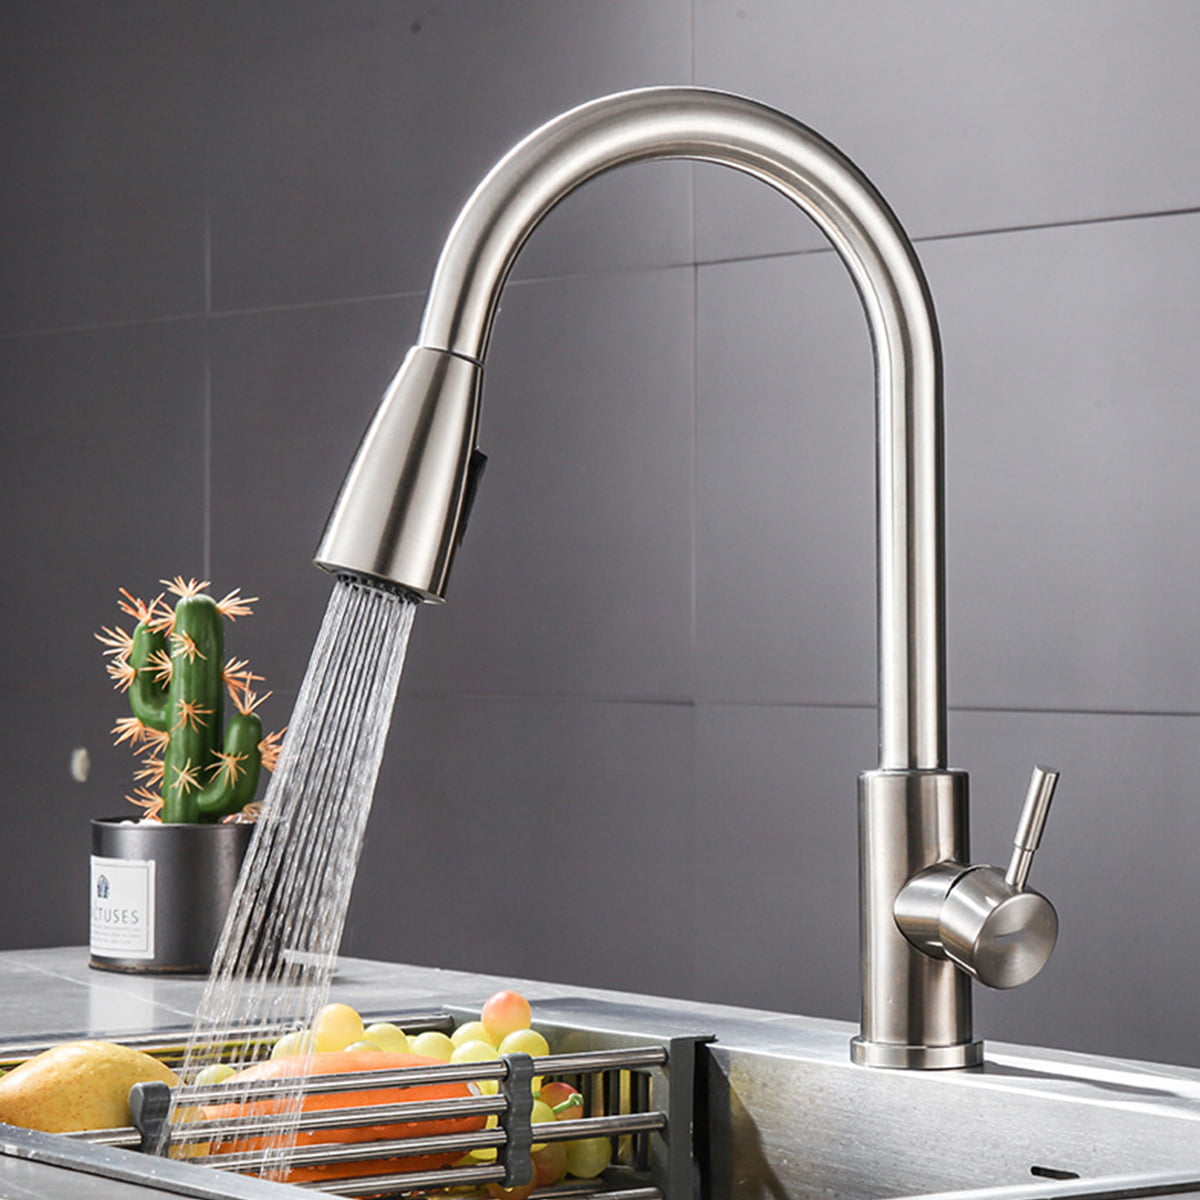 Details about   Single Handle High Arc Brushed Nickel Kitchen Sink Faucet w/ Pull Down Sprayer 